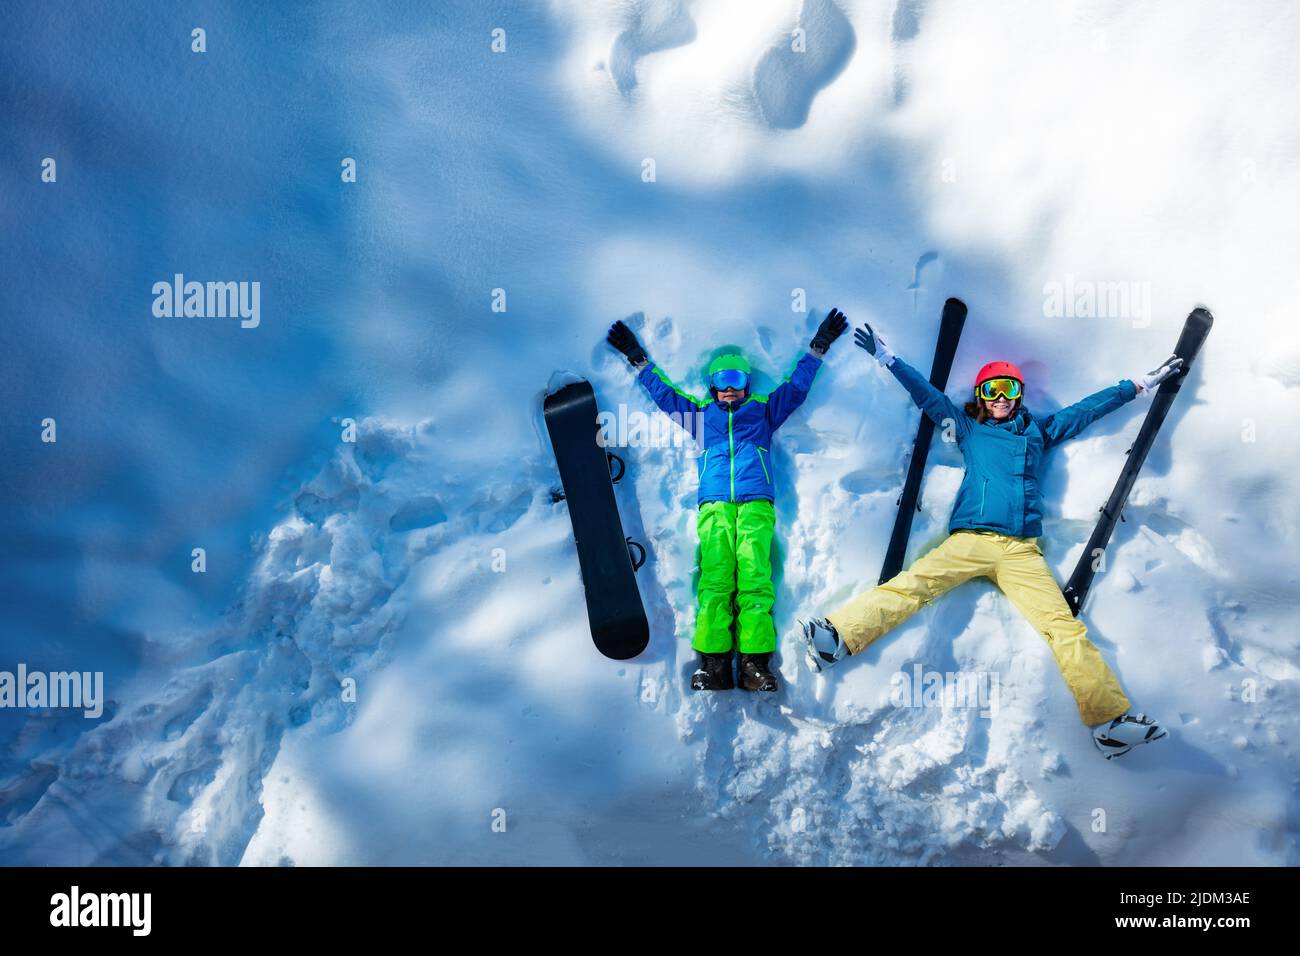 Mother and a boy lay in snow, wear ski outfit, view from above Stock Photo